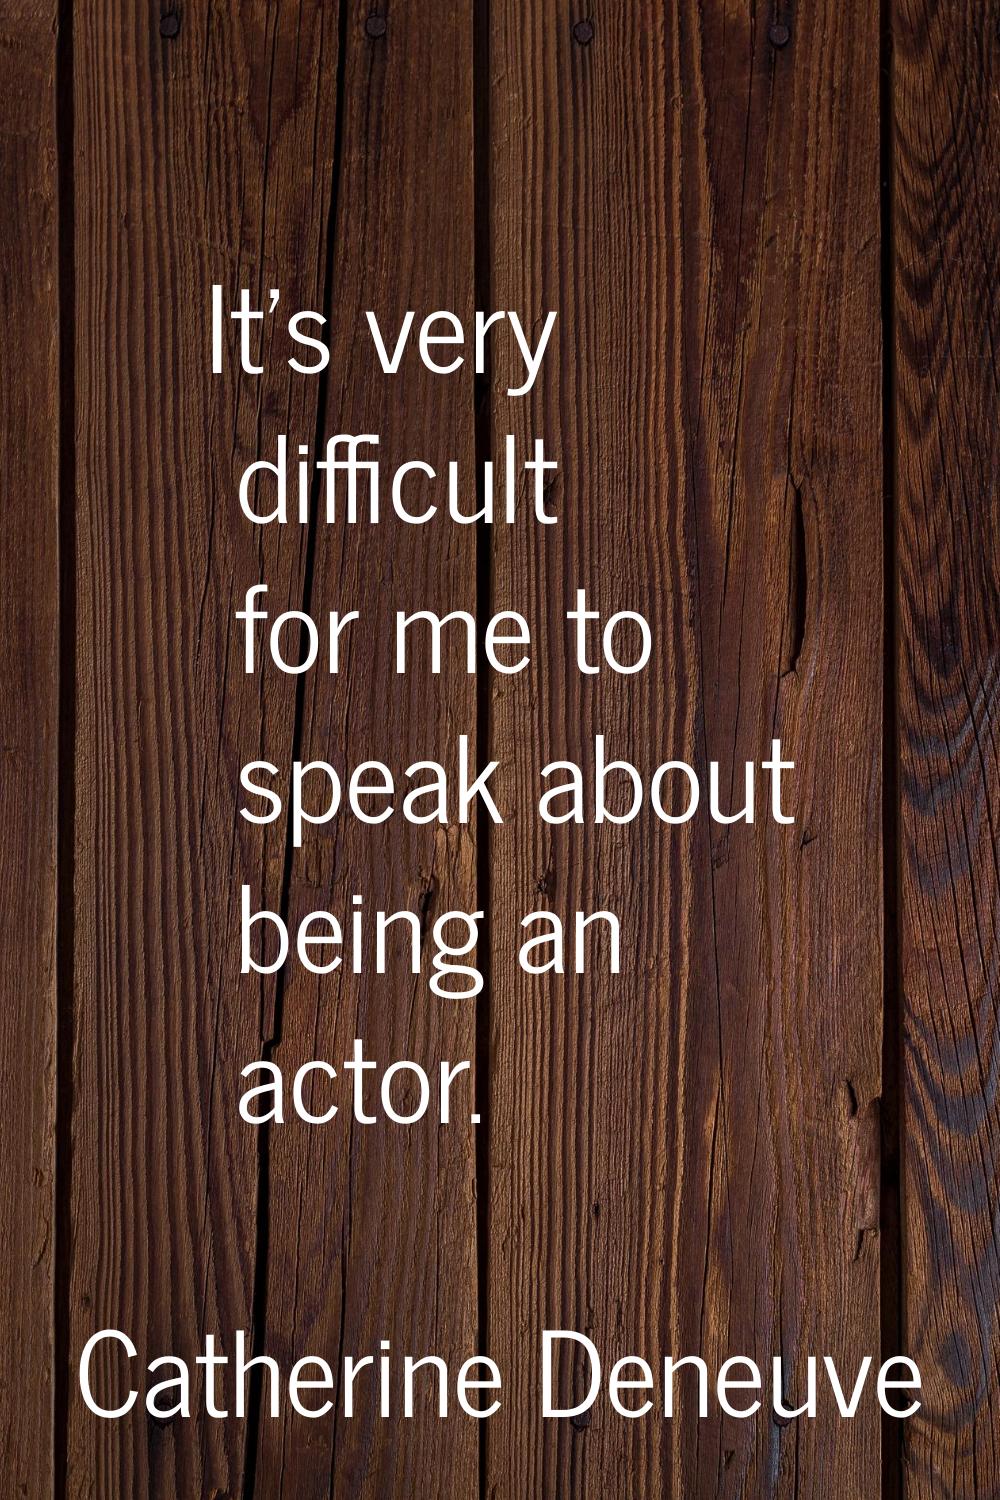 It's very difficult for me to speak about being an actor.